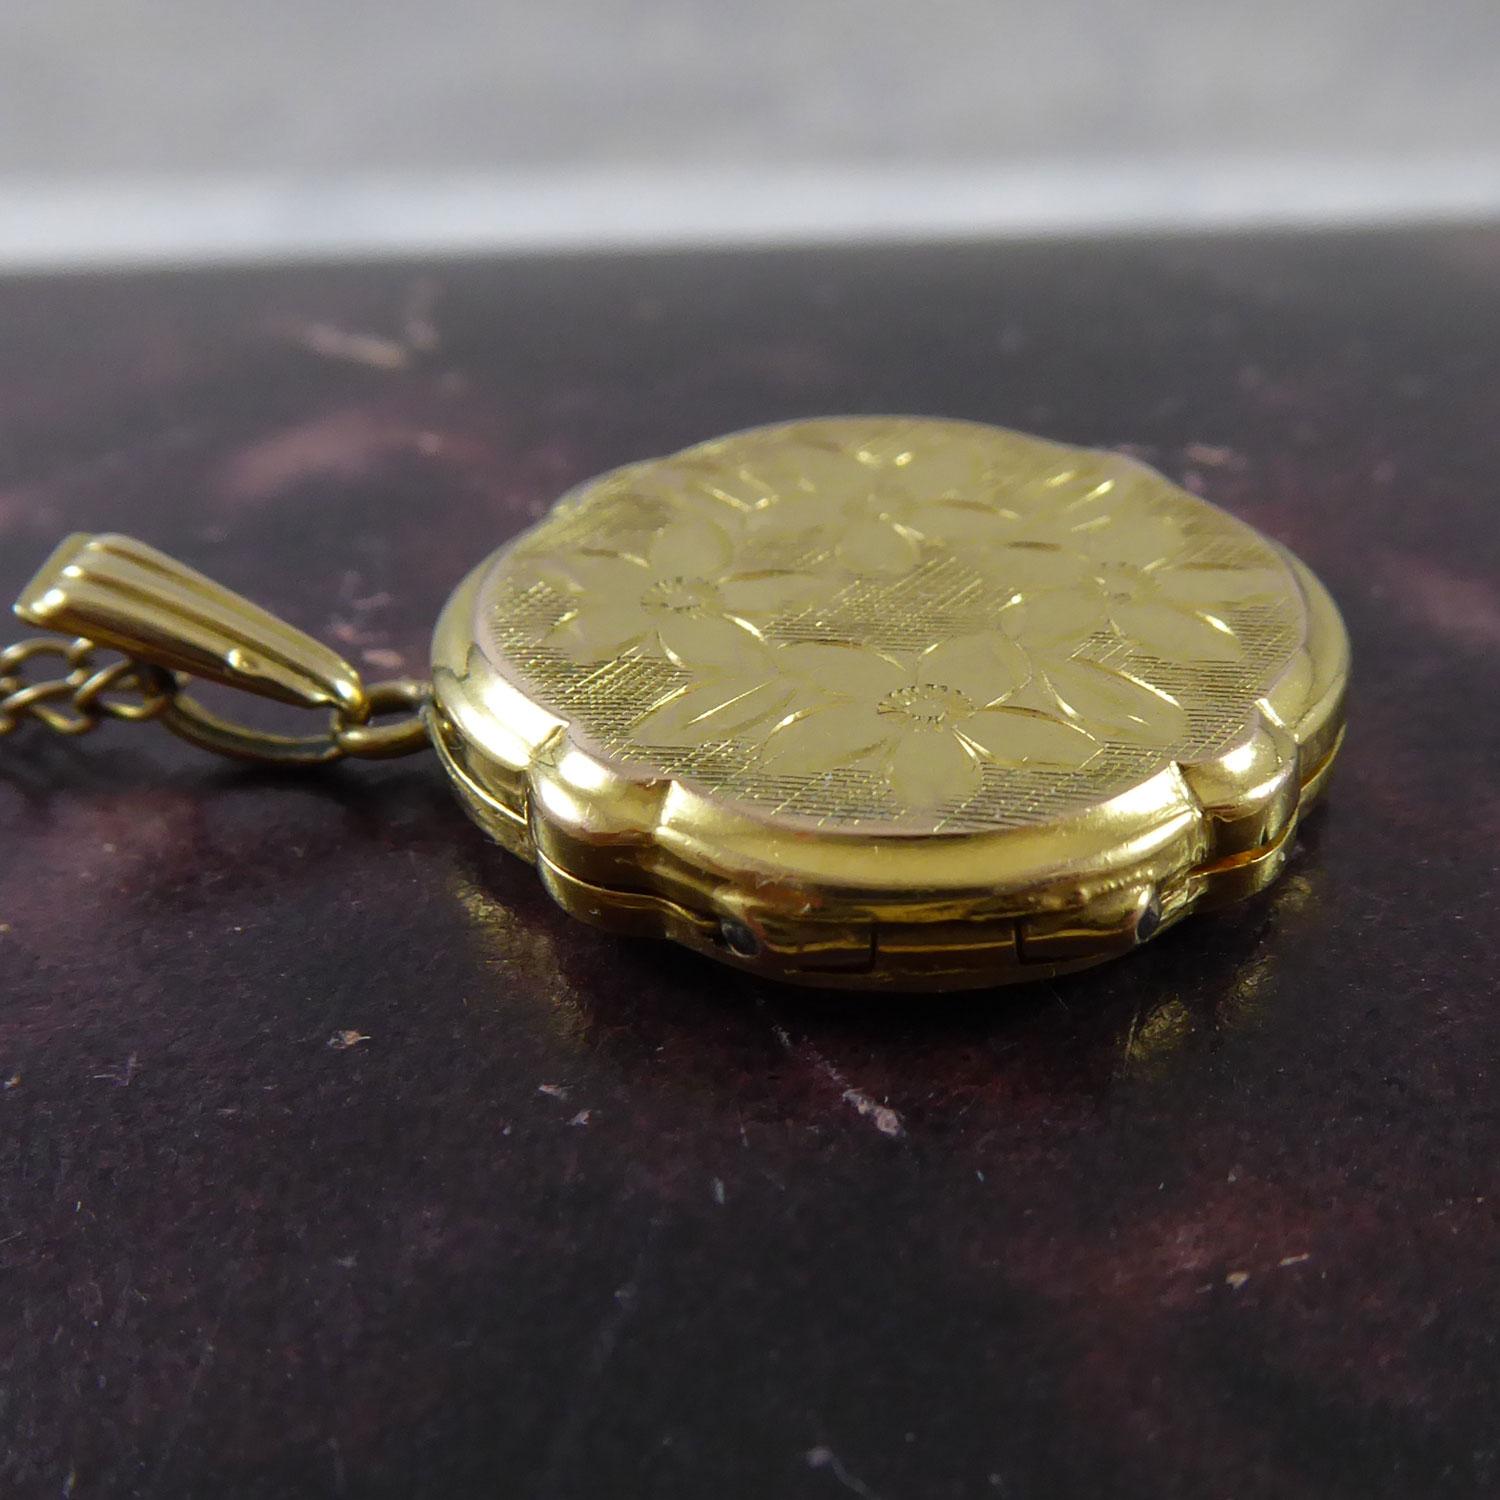 Retro Vintage Round Gold Locket with Floral Engraving, Yellow Gold